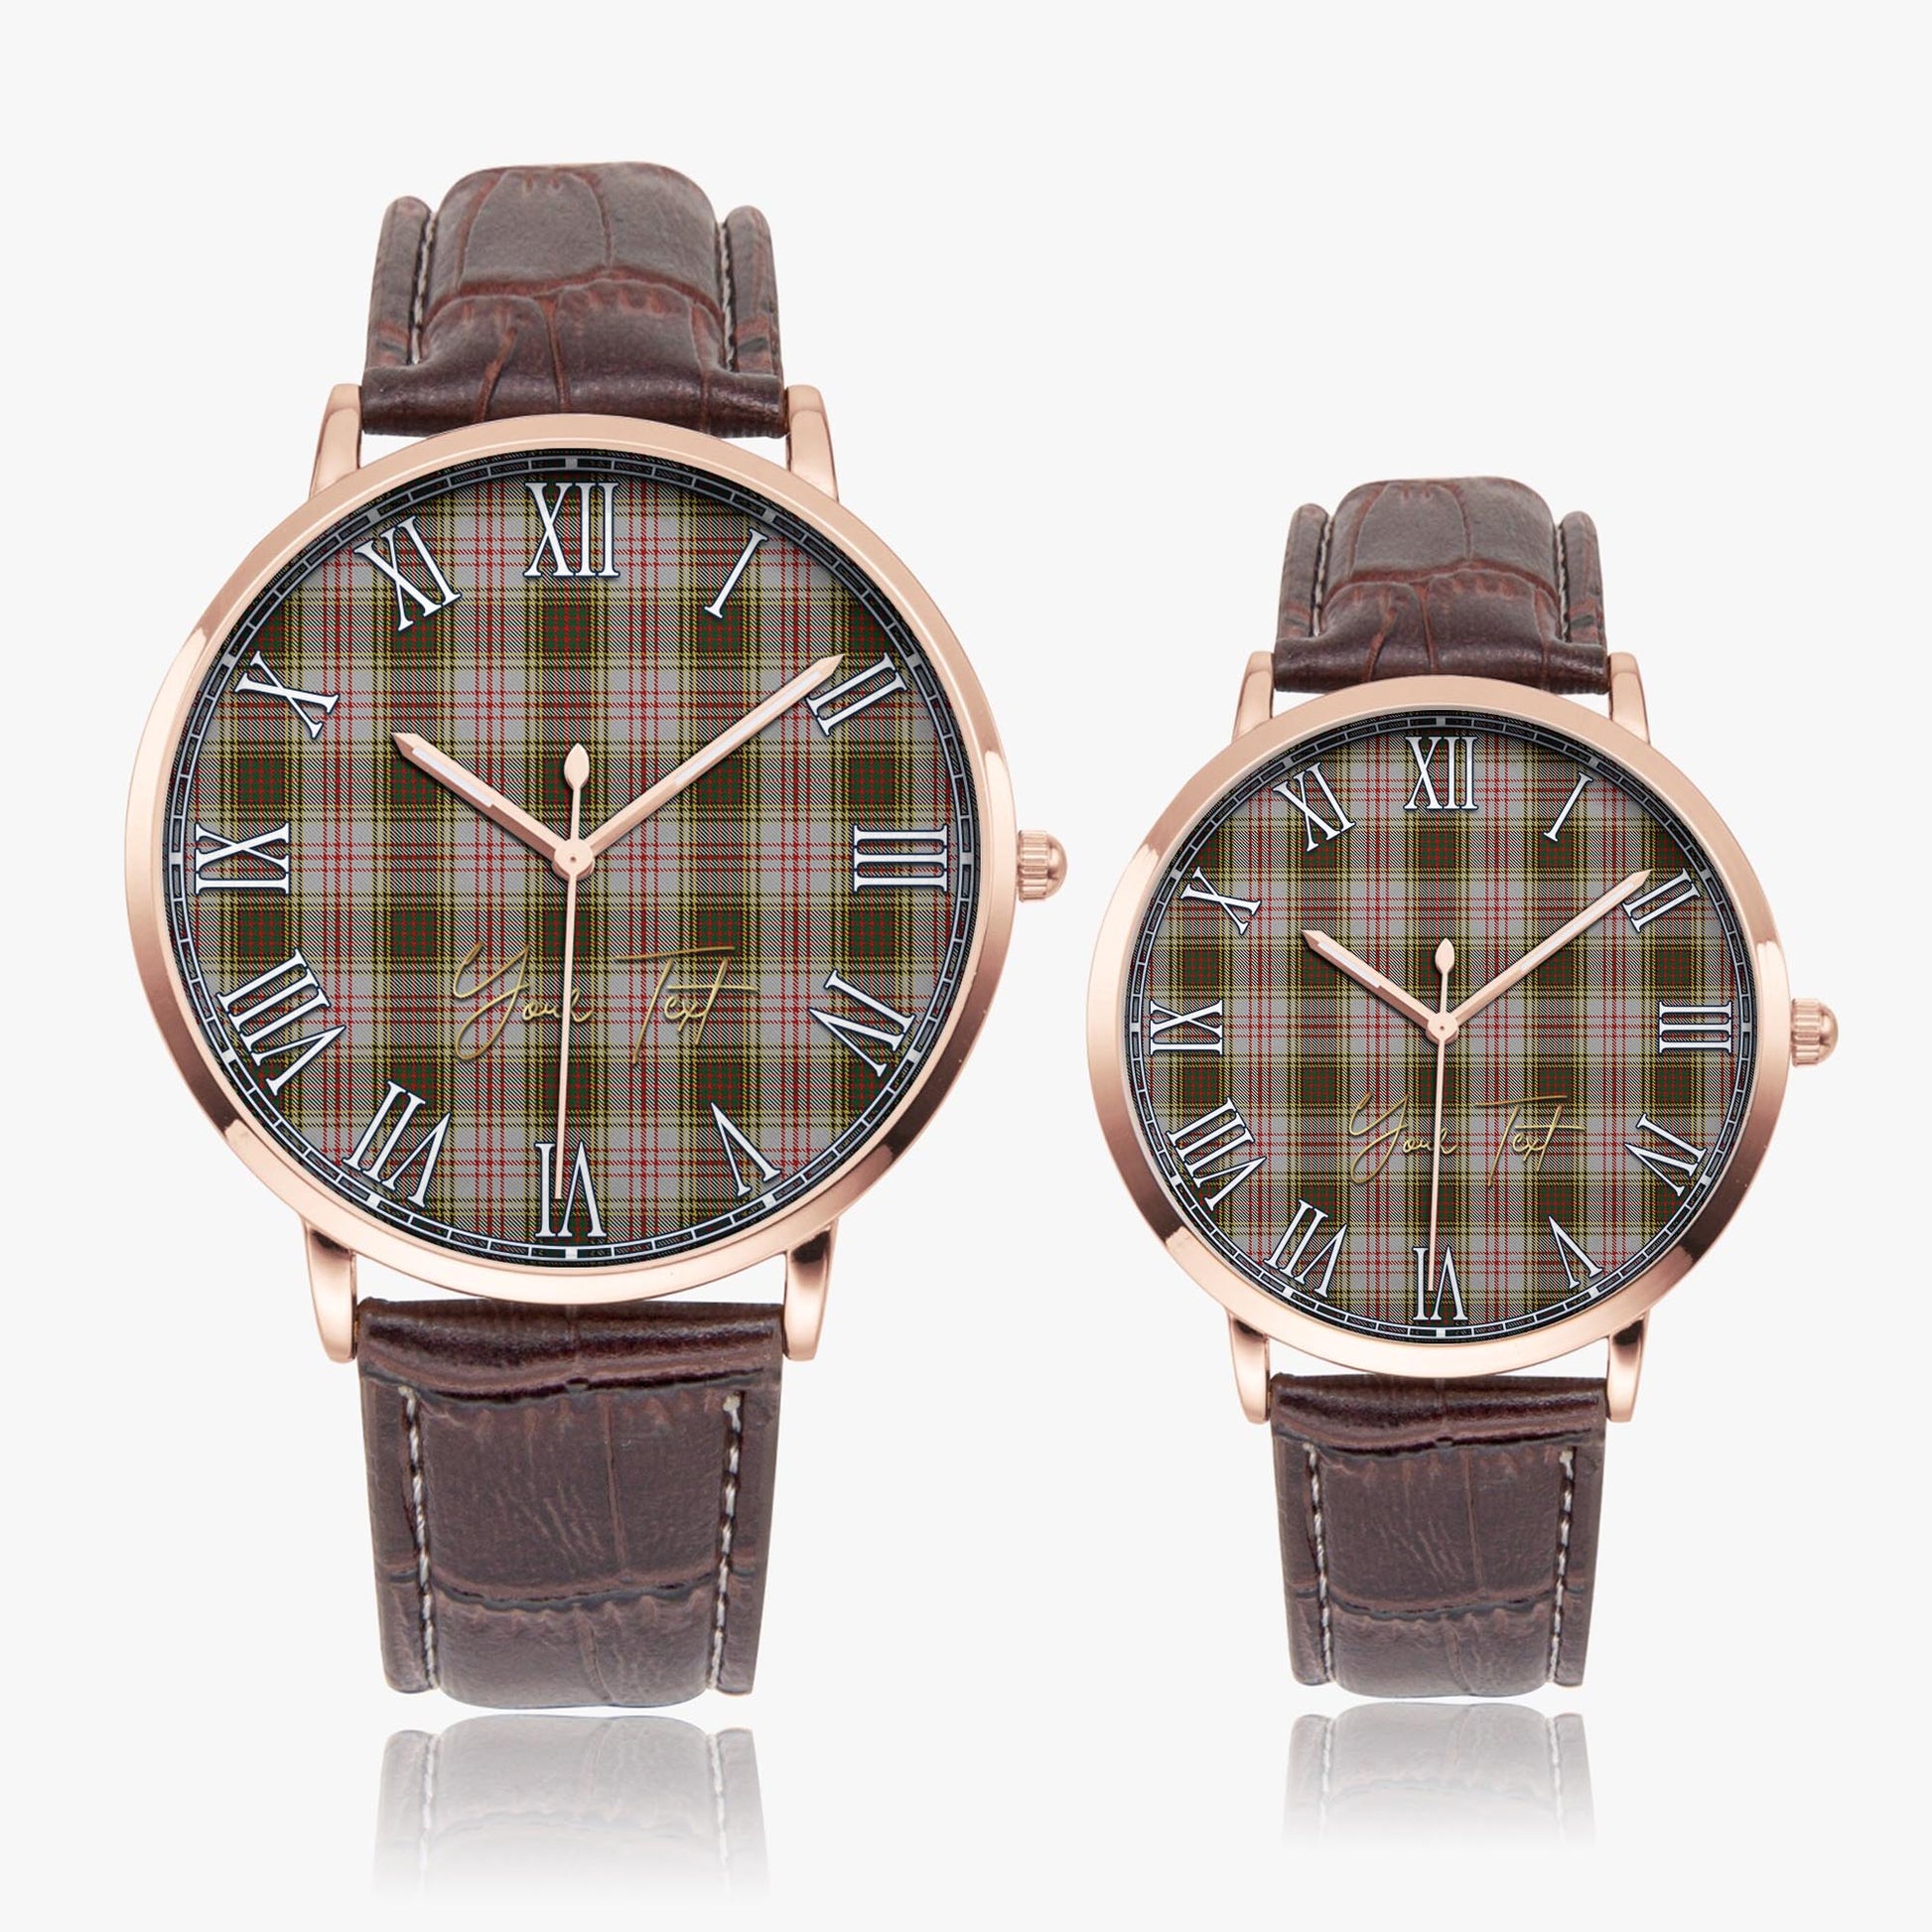 Anderson Dress Tartan Personalized Your Text Leather Trap Quartz Watch Ultra Thin Rose Gold Case With Brown Leather Strap - Tartanvibesclothing